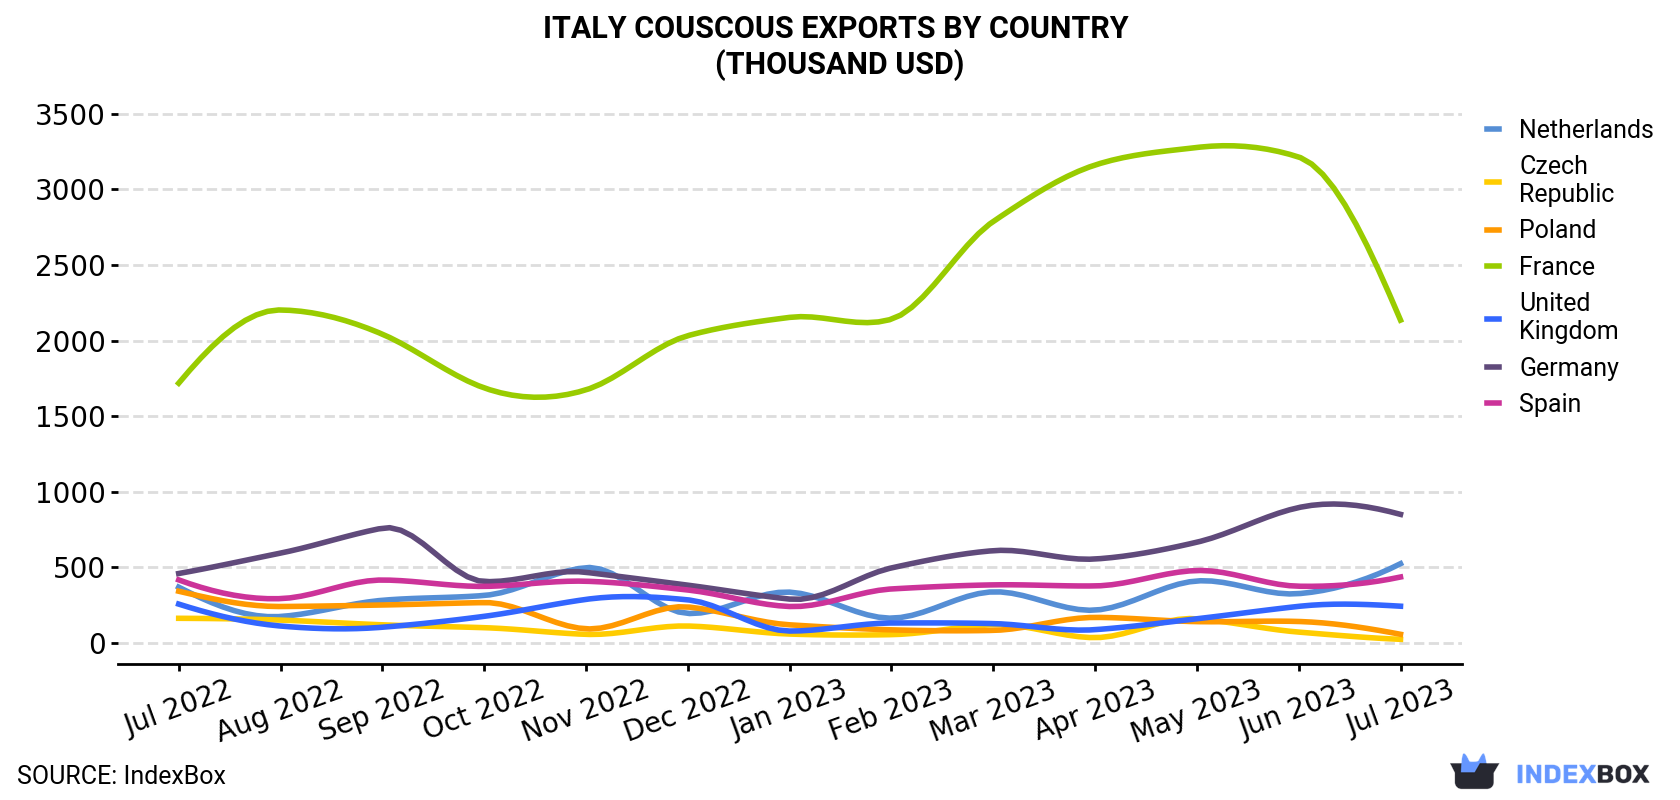 Italy Couscous Exports By Country (Thousand USD)